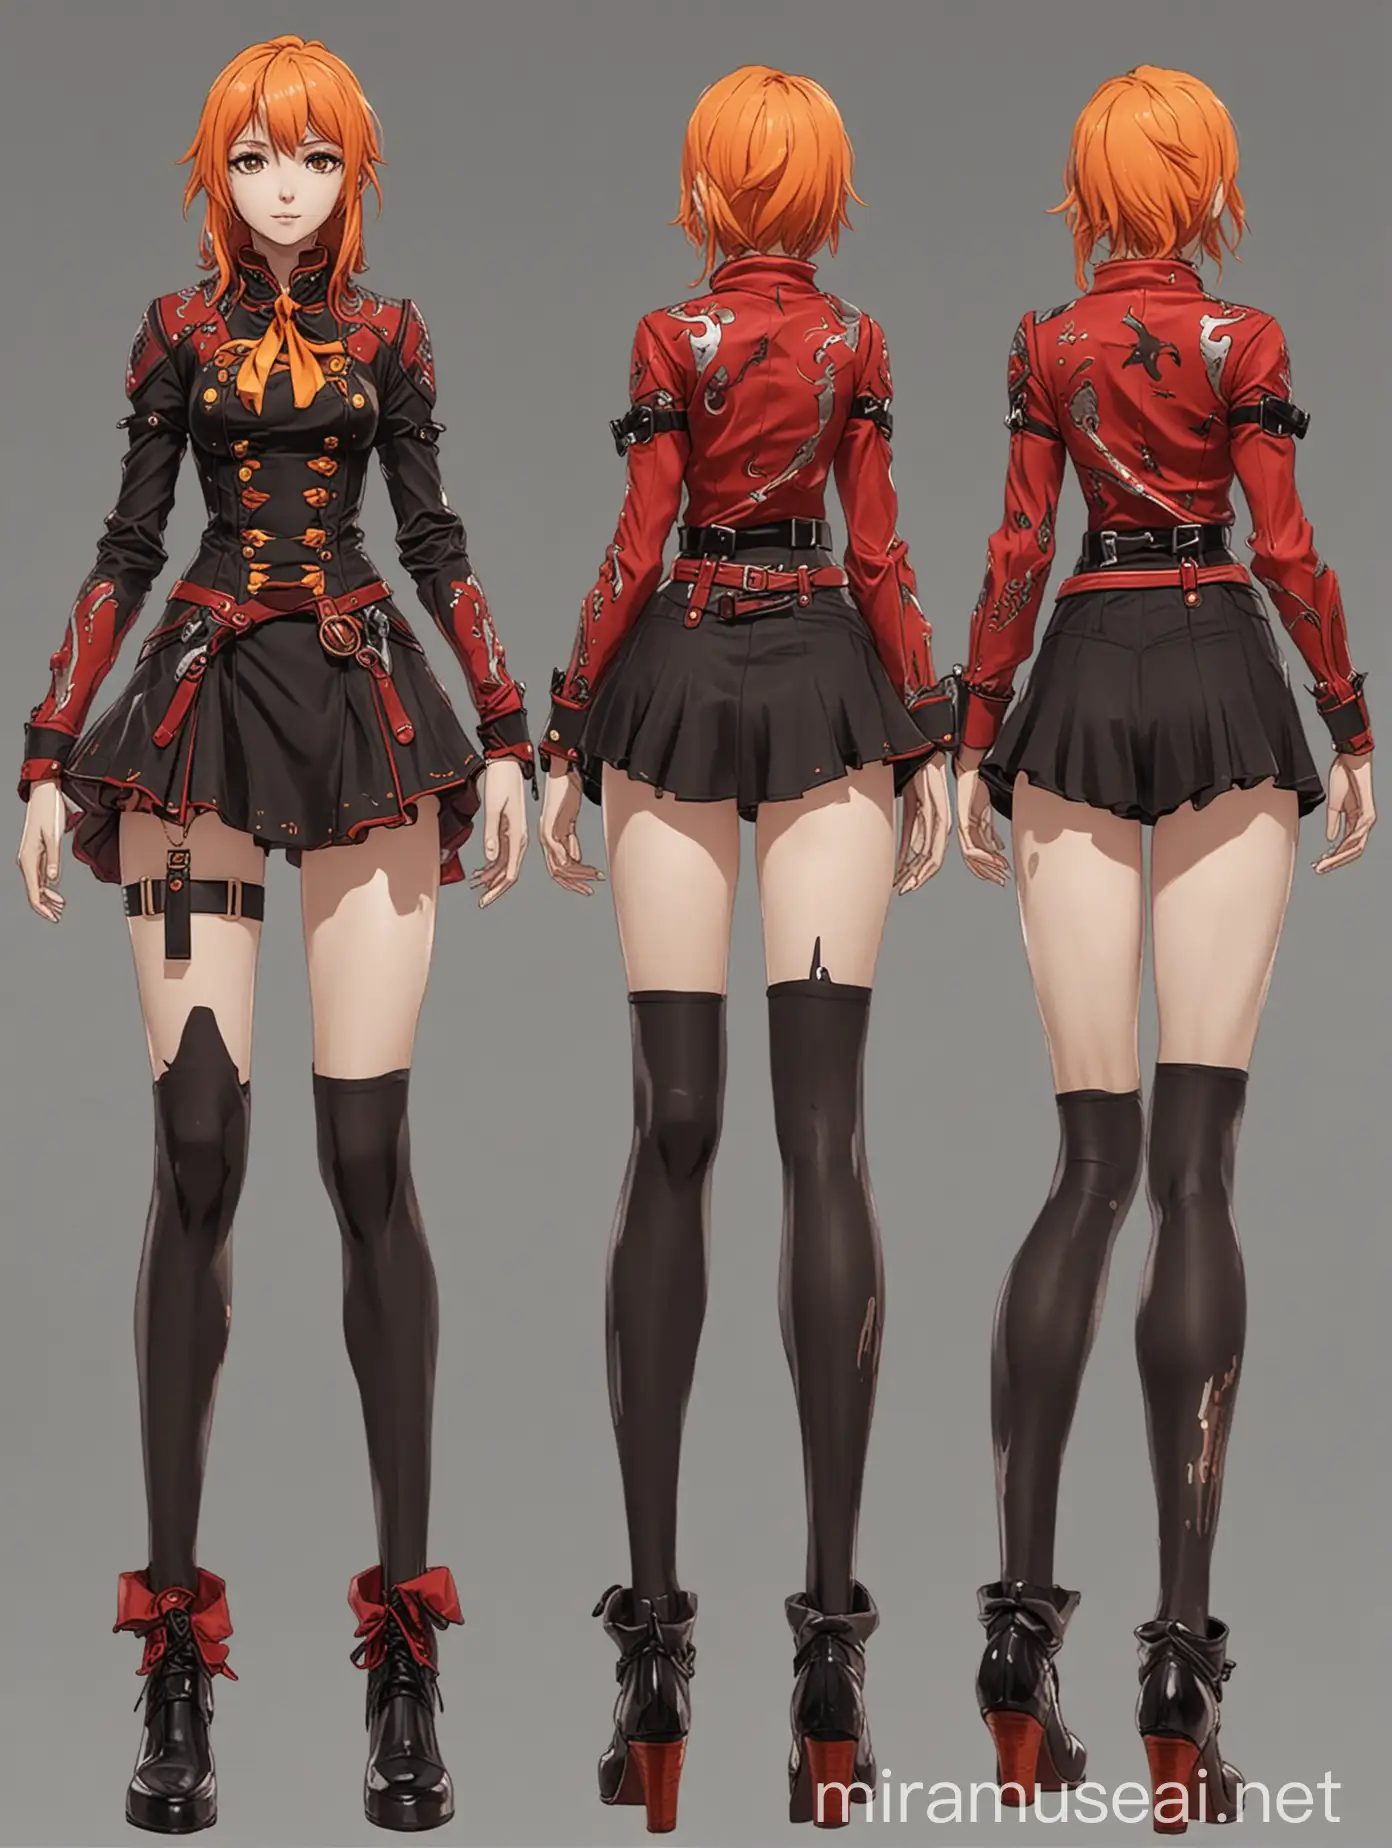 Anime Outfit Designs for Holidays Halloween and Style Fire